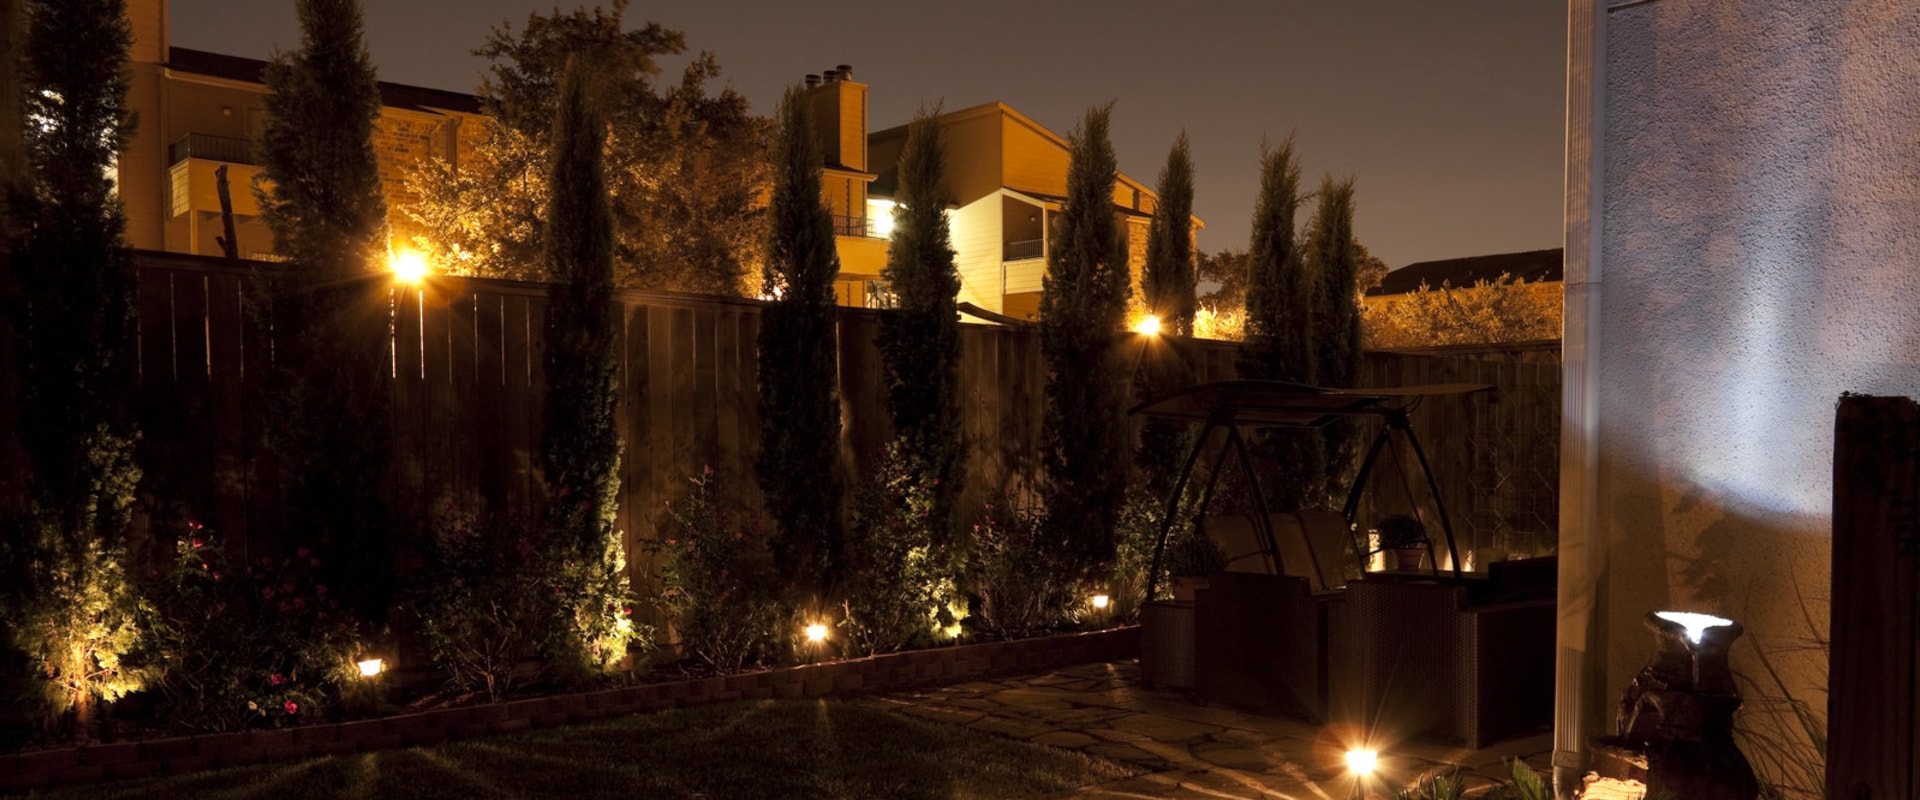 Landscape Lighting: The Perfect Finishing Touch For Your Houston Home Renovation